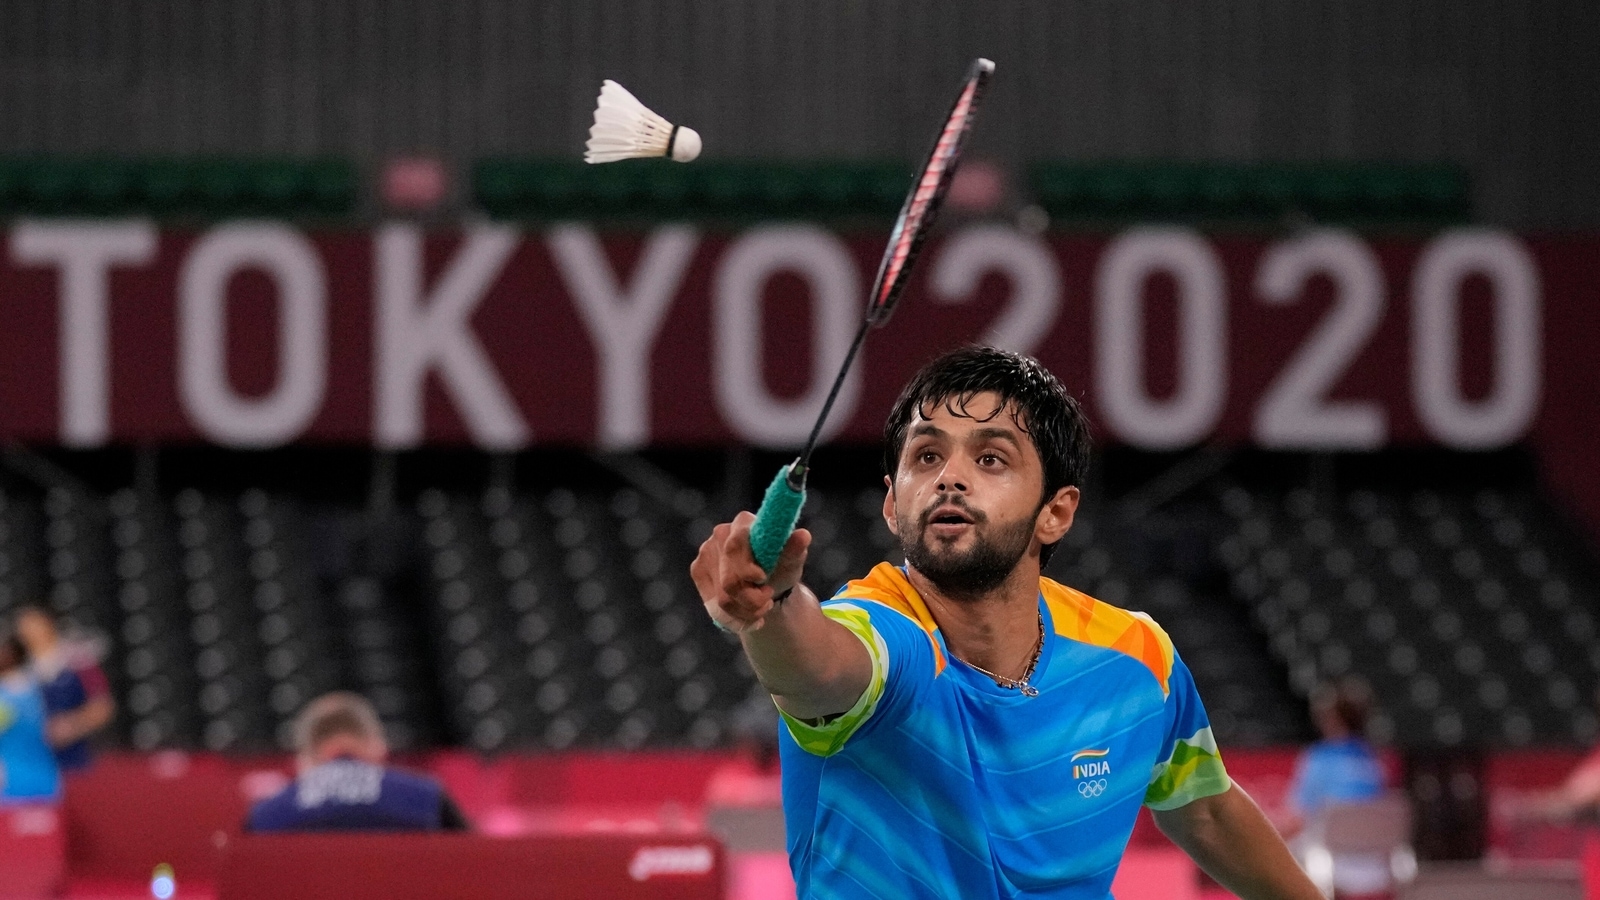 Tokyo Olympics: Praneeth loses opening match on Olympic debut | Olympics